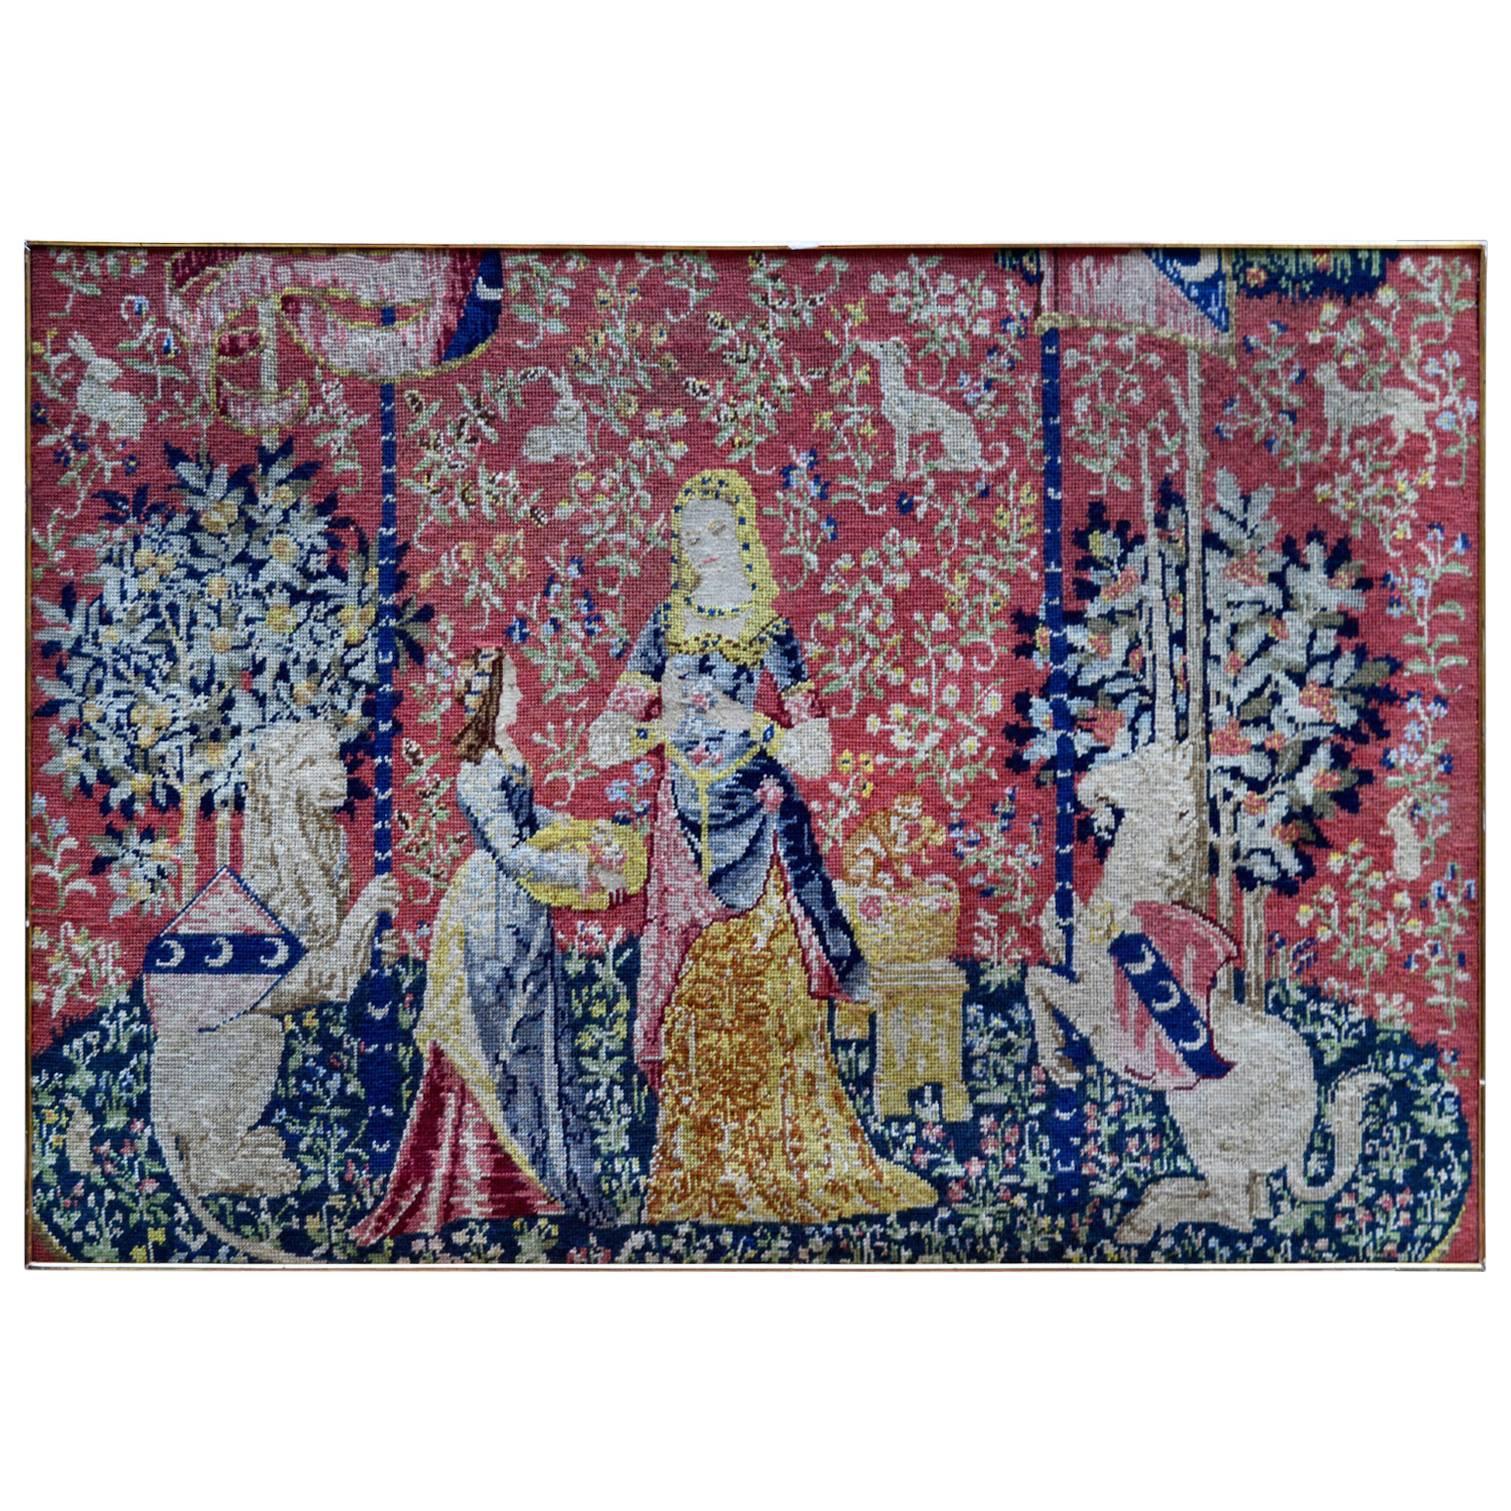 Medieval Style Flemish Needlework Tapestry of a Lion, Maidens and Unicorn